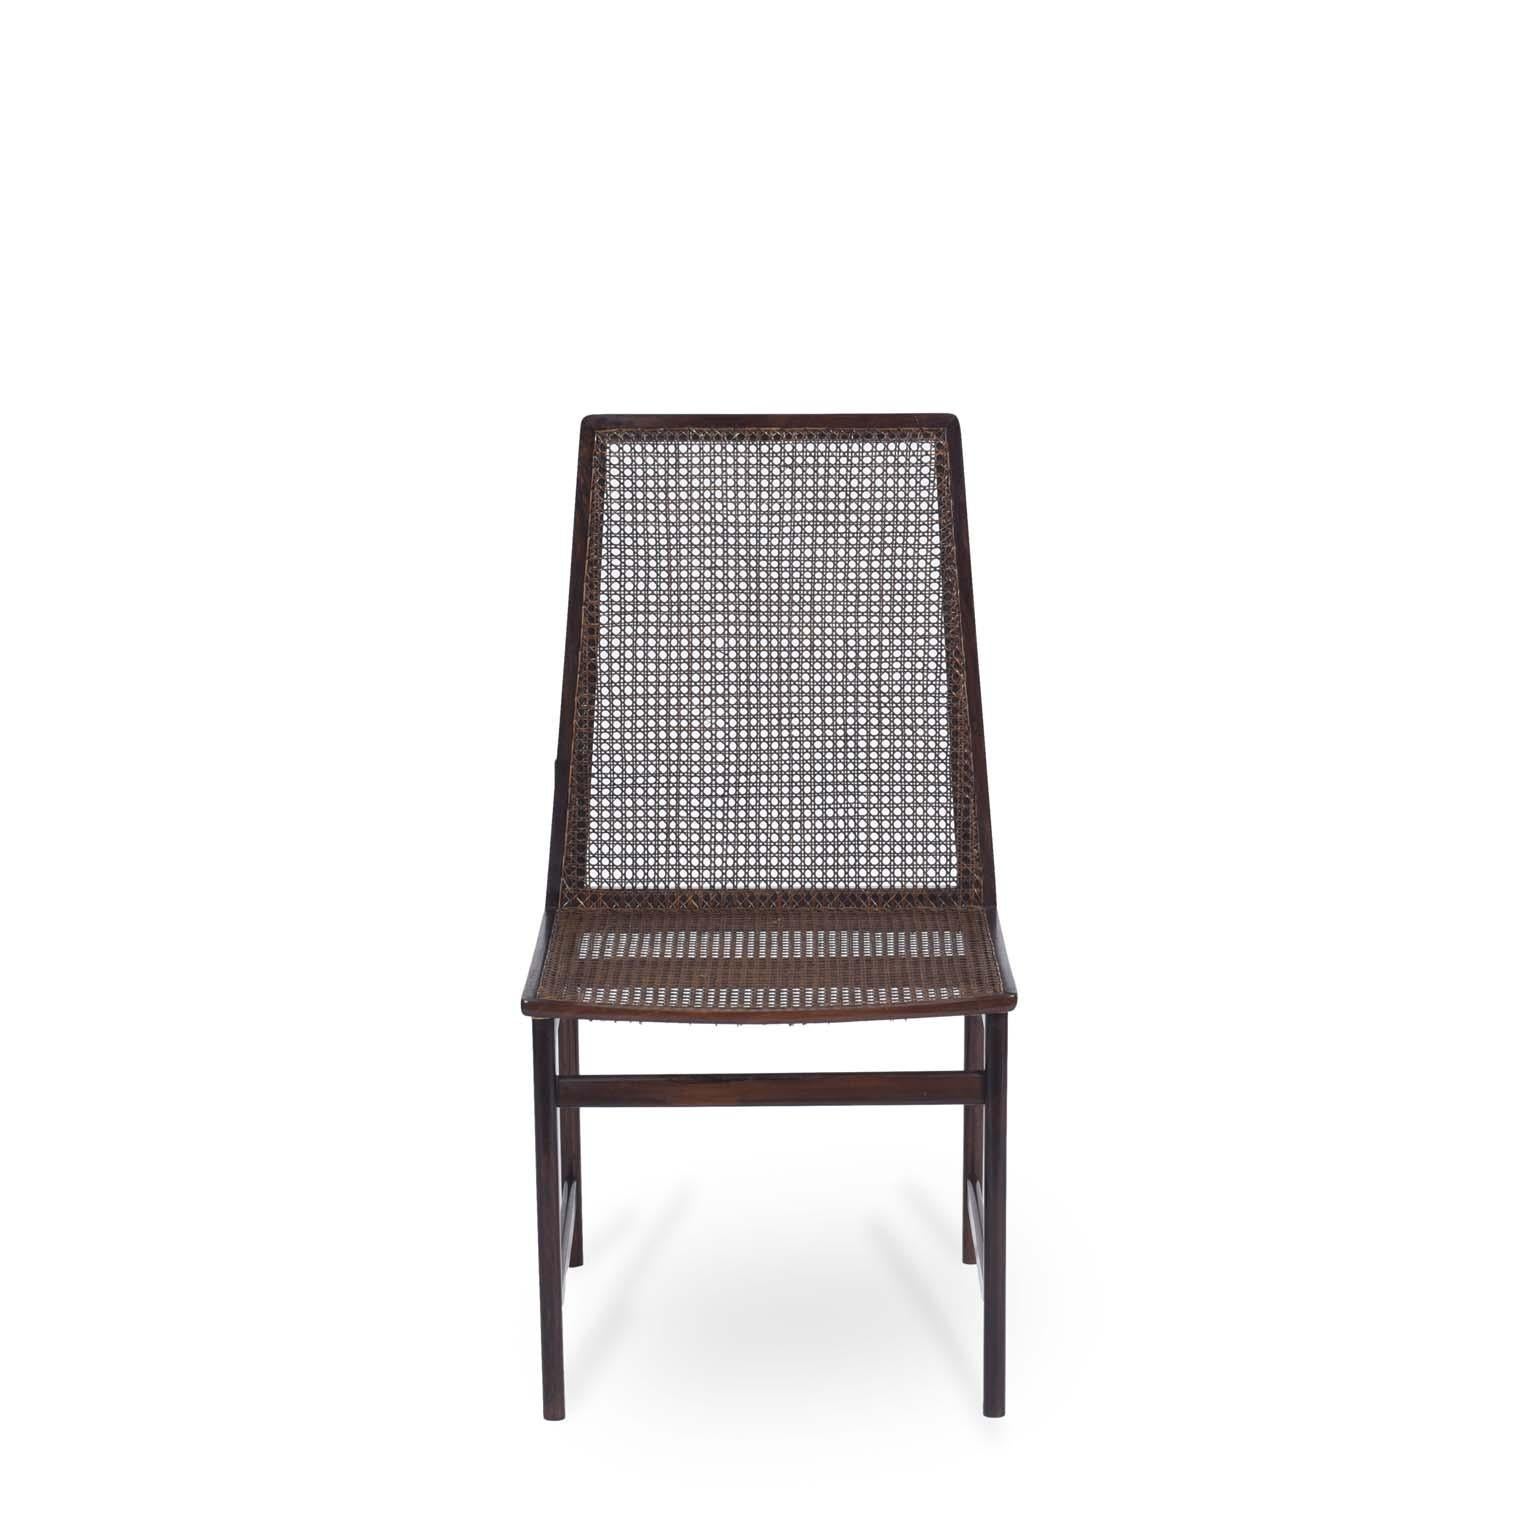 Alexandre Rapoport midcentury Brazilian chair in rosewood and straw seat, 1960s.

Architect graduated from the Federal University of Rio de Janeiro in 1952, he founded the store / gallery Módulo. He exhibited his works at art fairs in Germany,